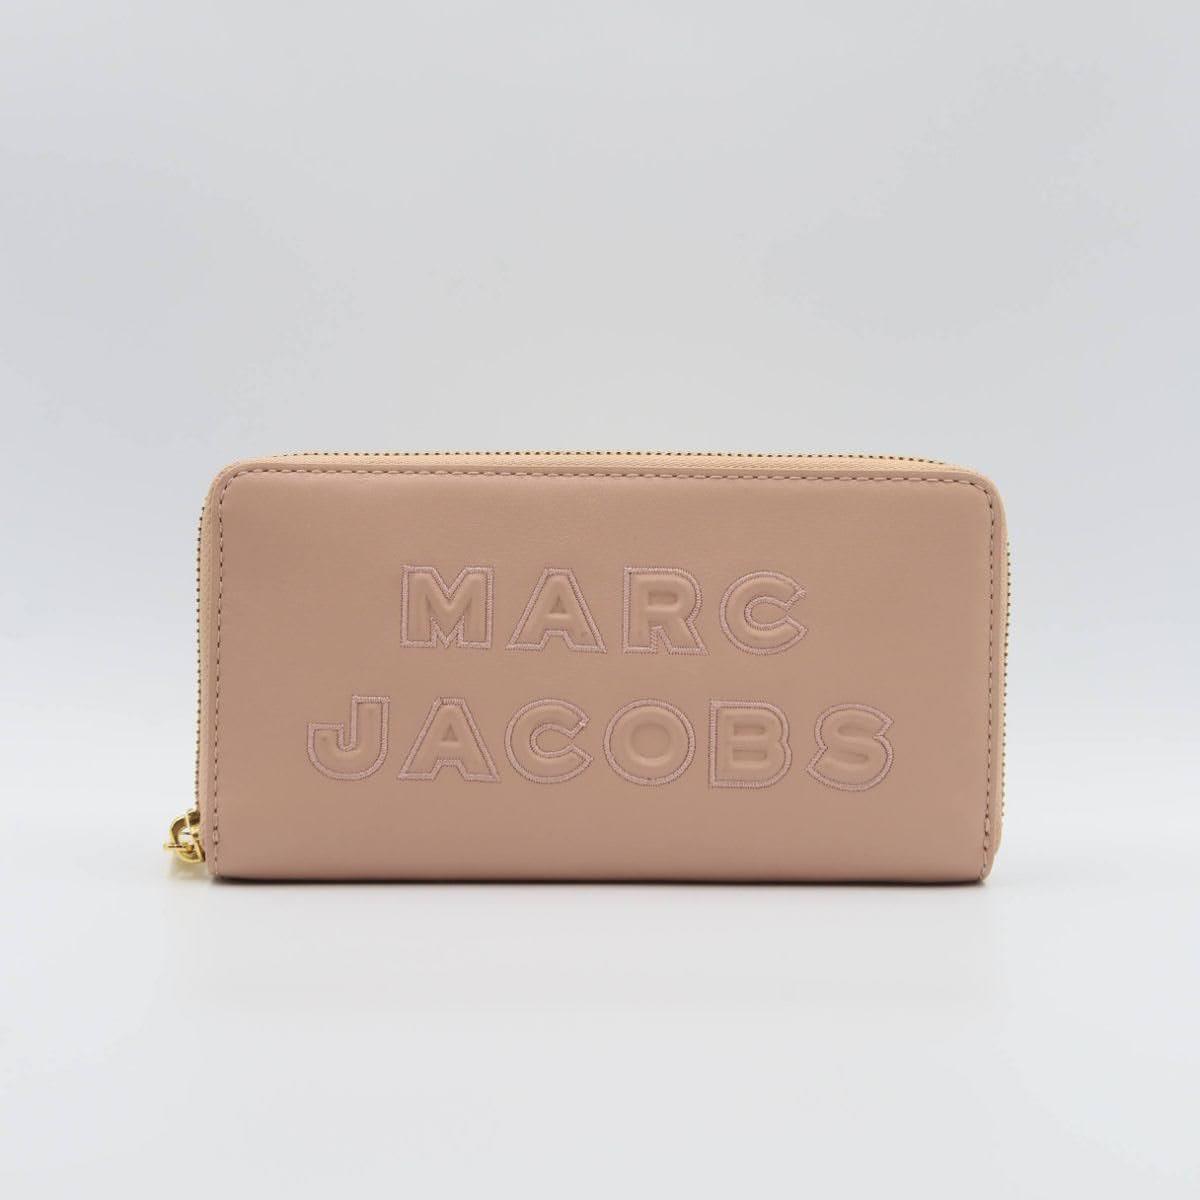  Marc Jacobs Wallets